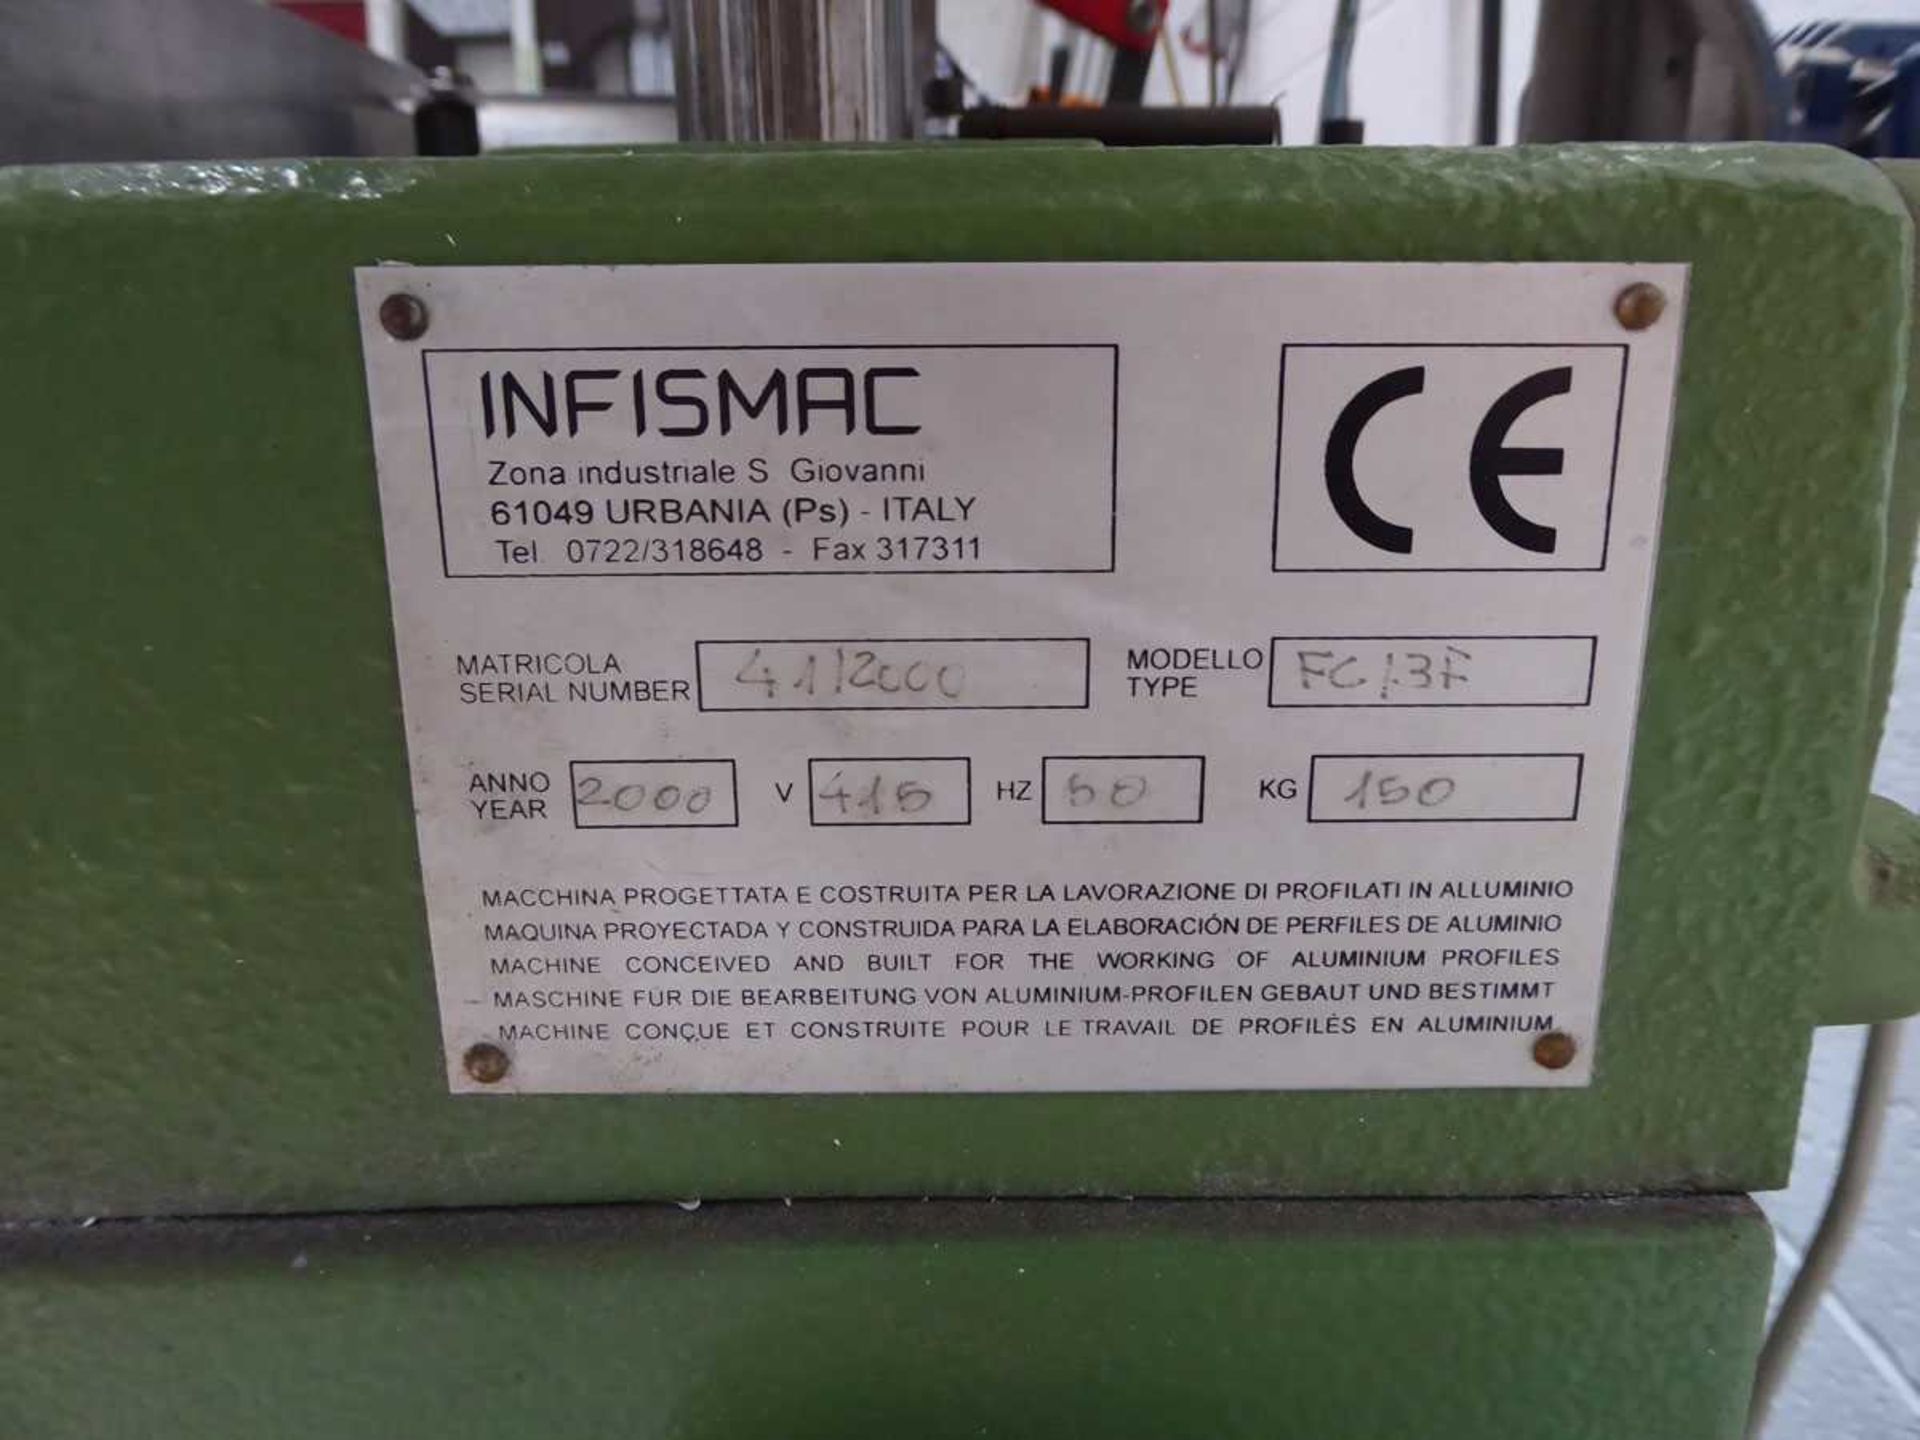 Infismac FC13F copy router, serial no. 4112000, year 2000 - Image 4 of 6